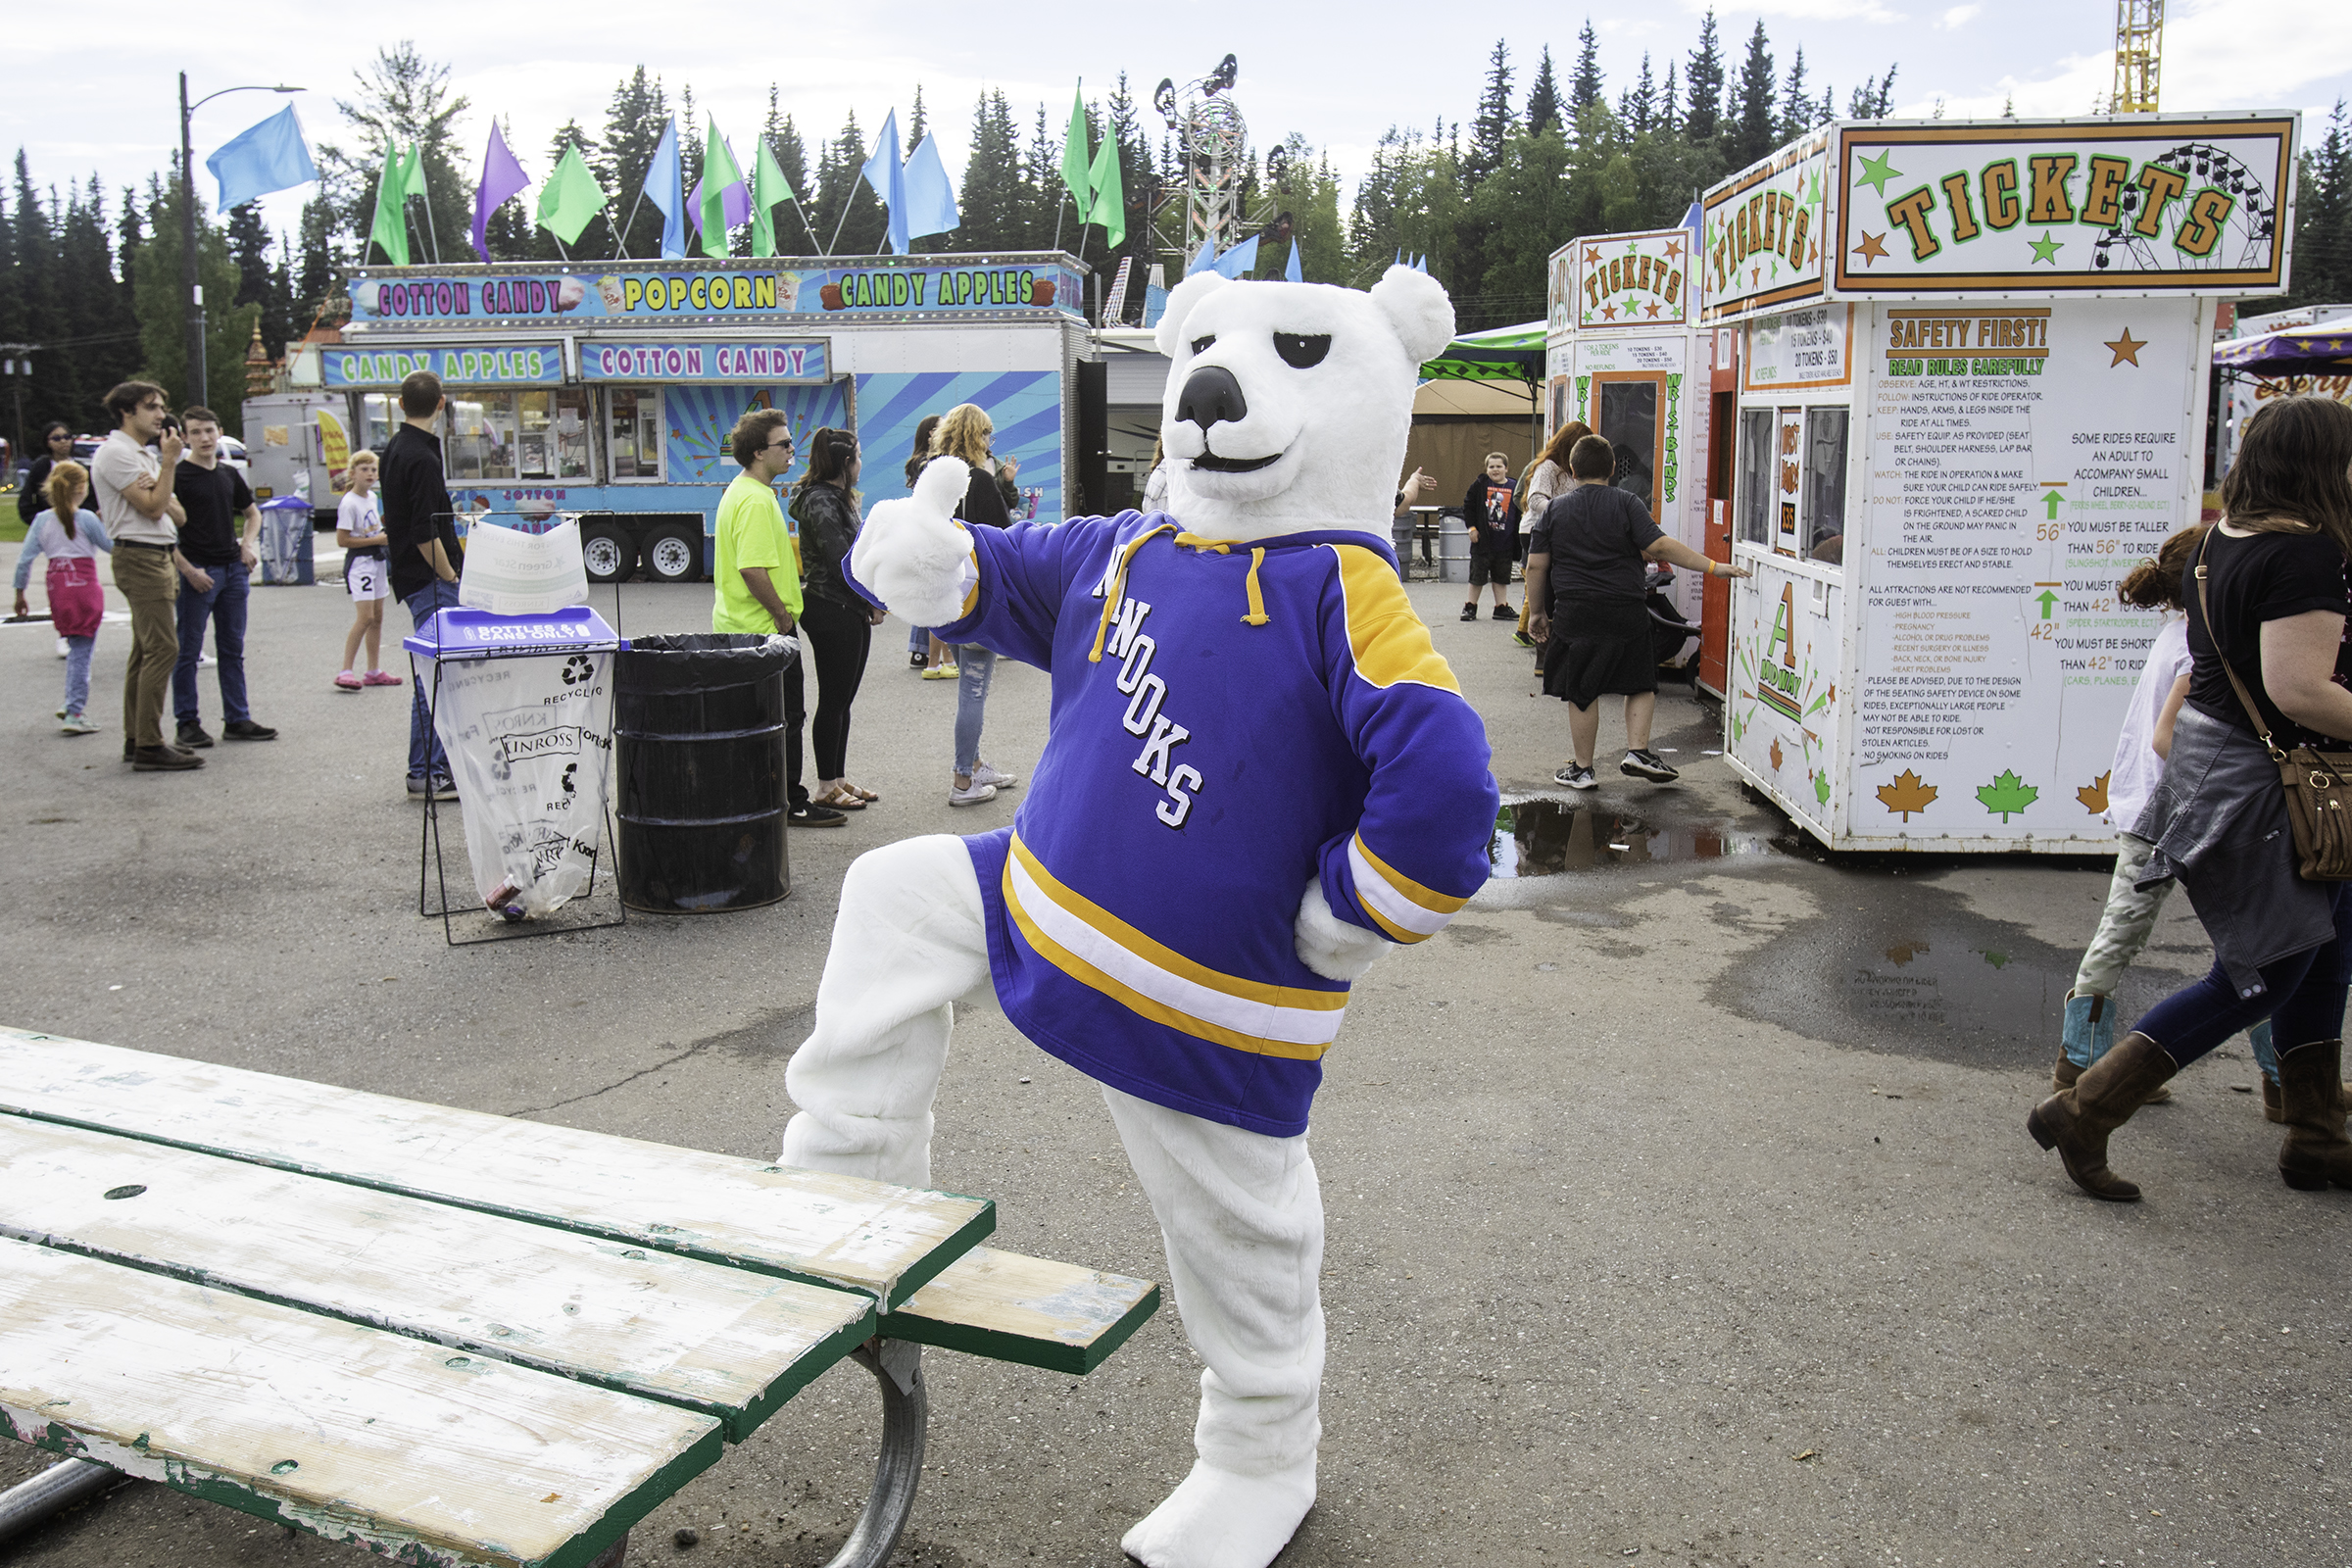 a polar bear mascot wearing a UAF jersey stands on the midway at the fair while giving a thumbs up.